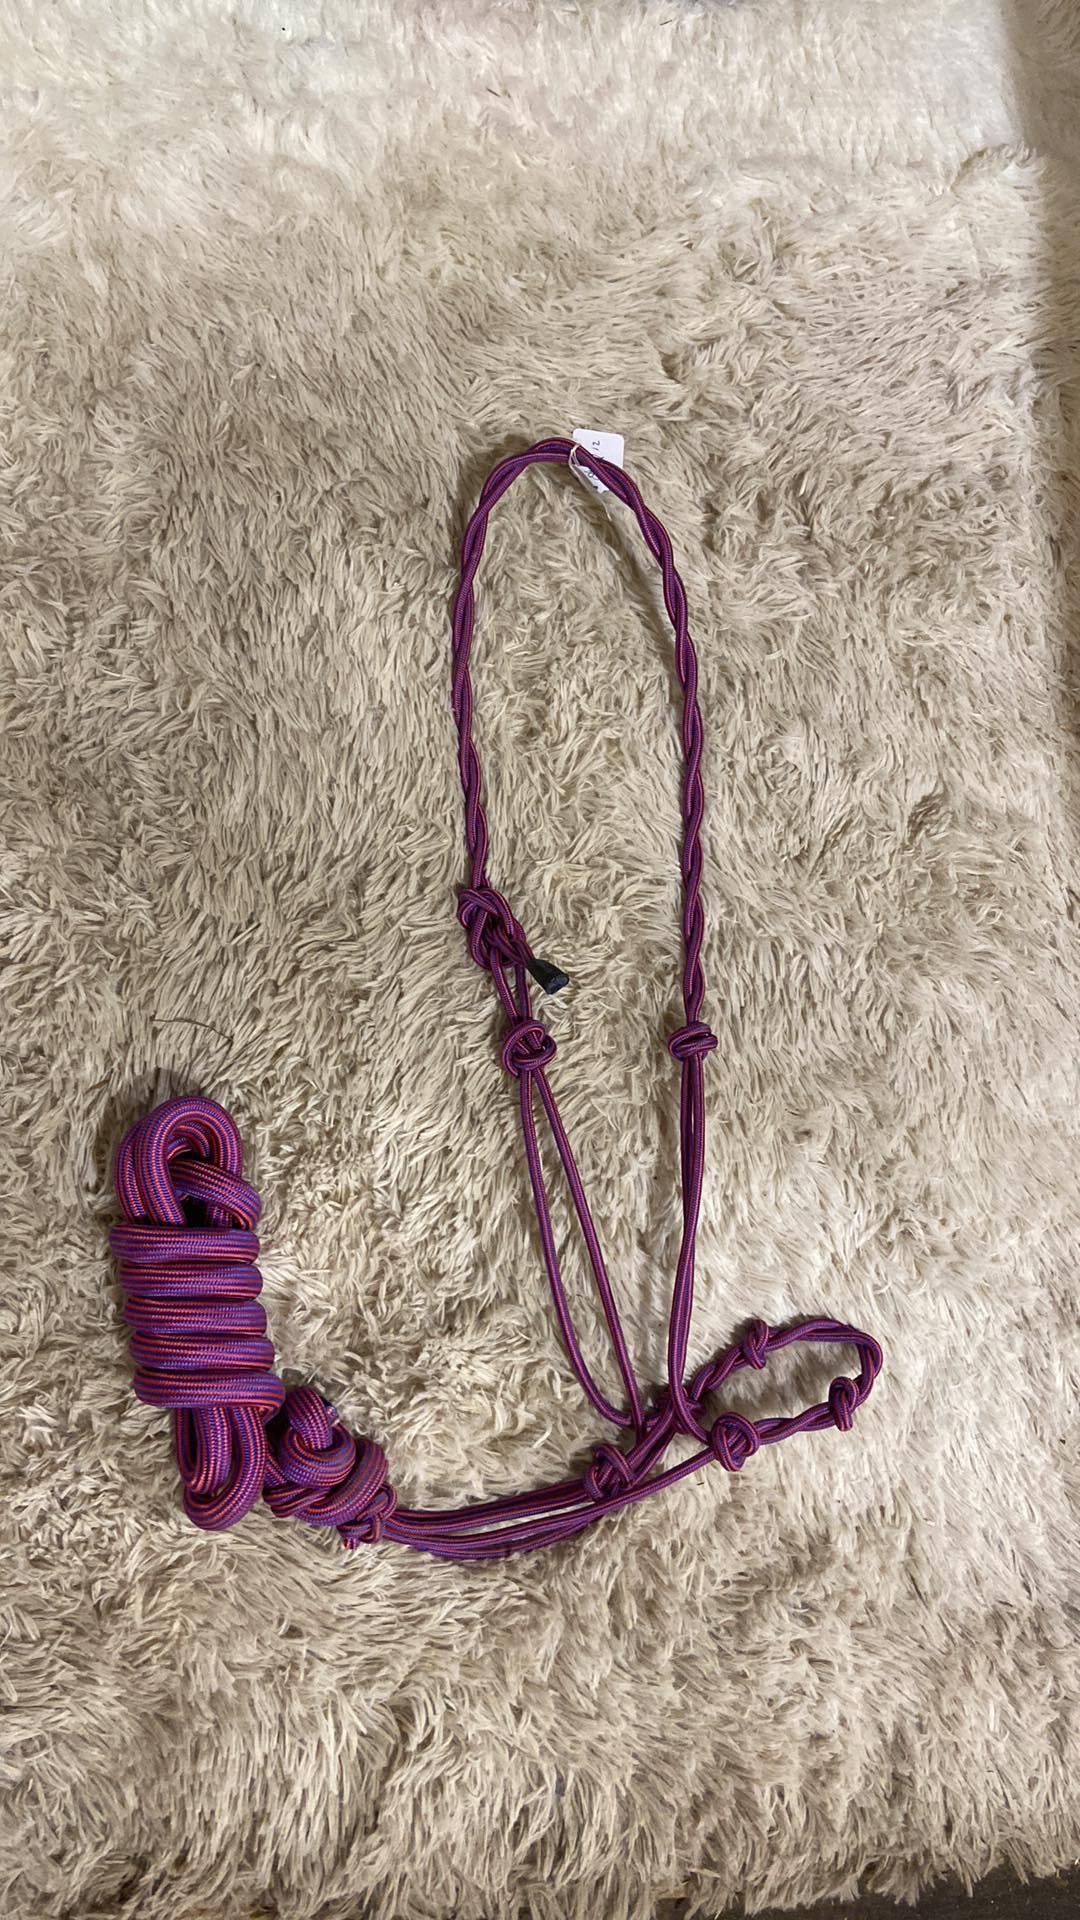 Rope halter with knots and lead new full size